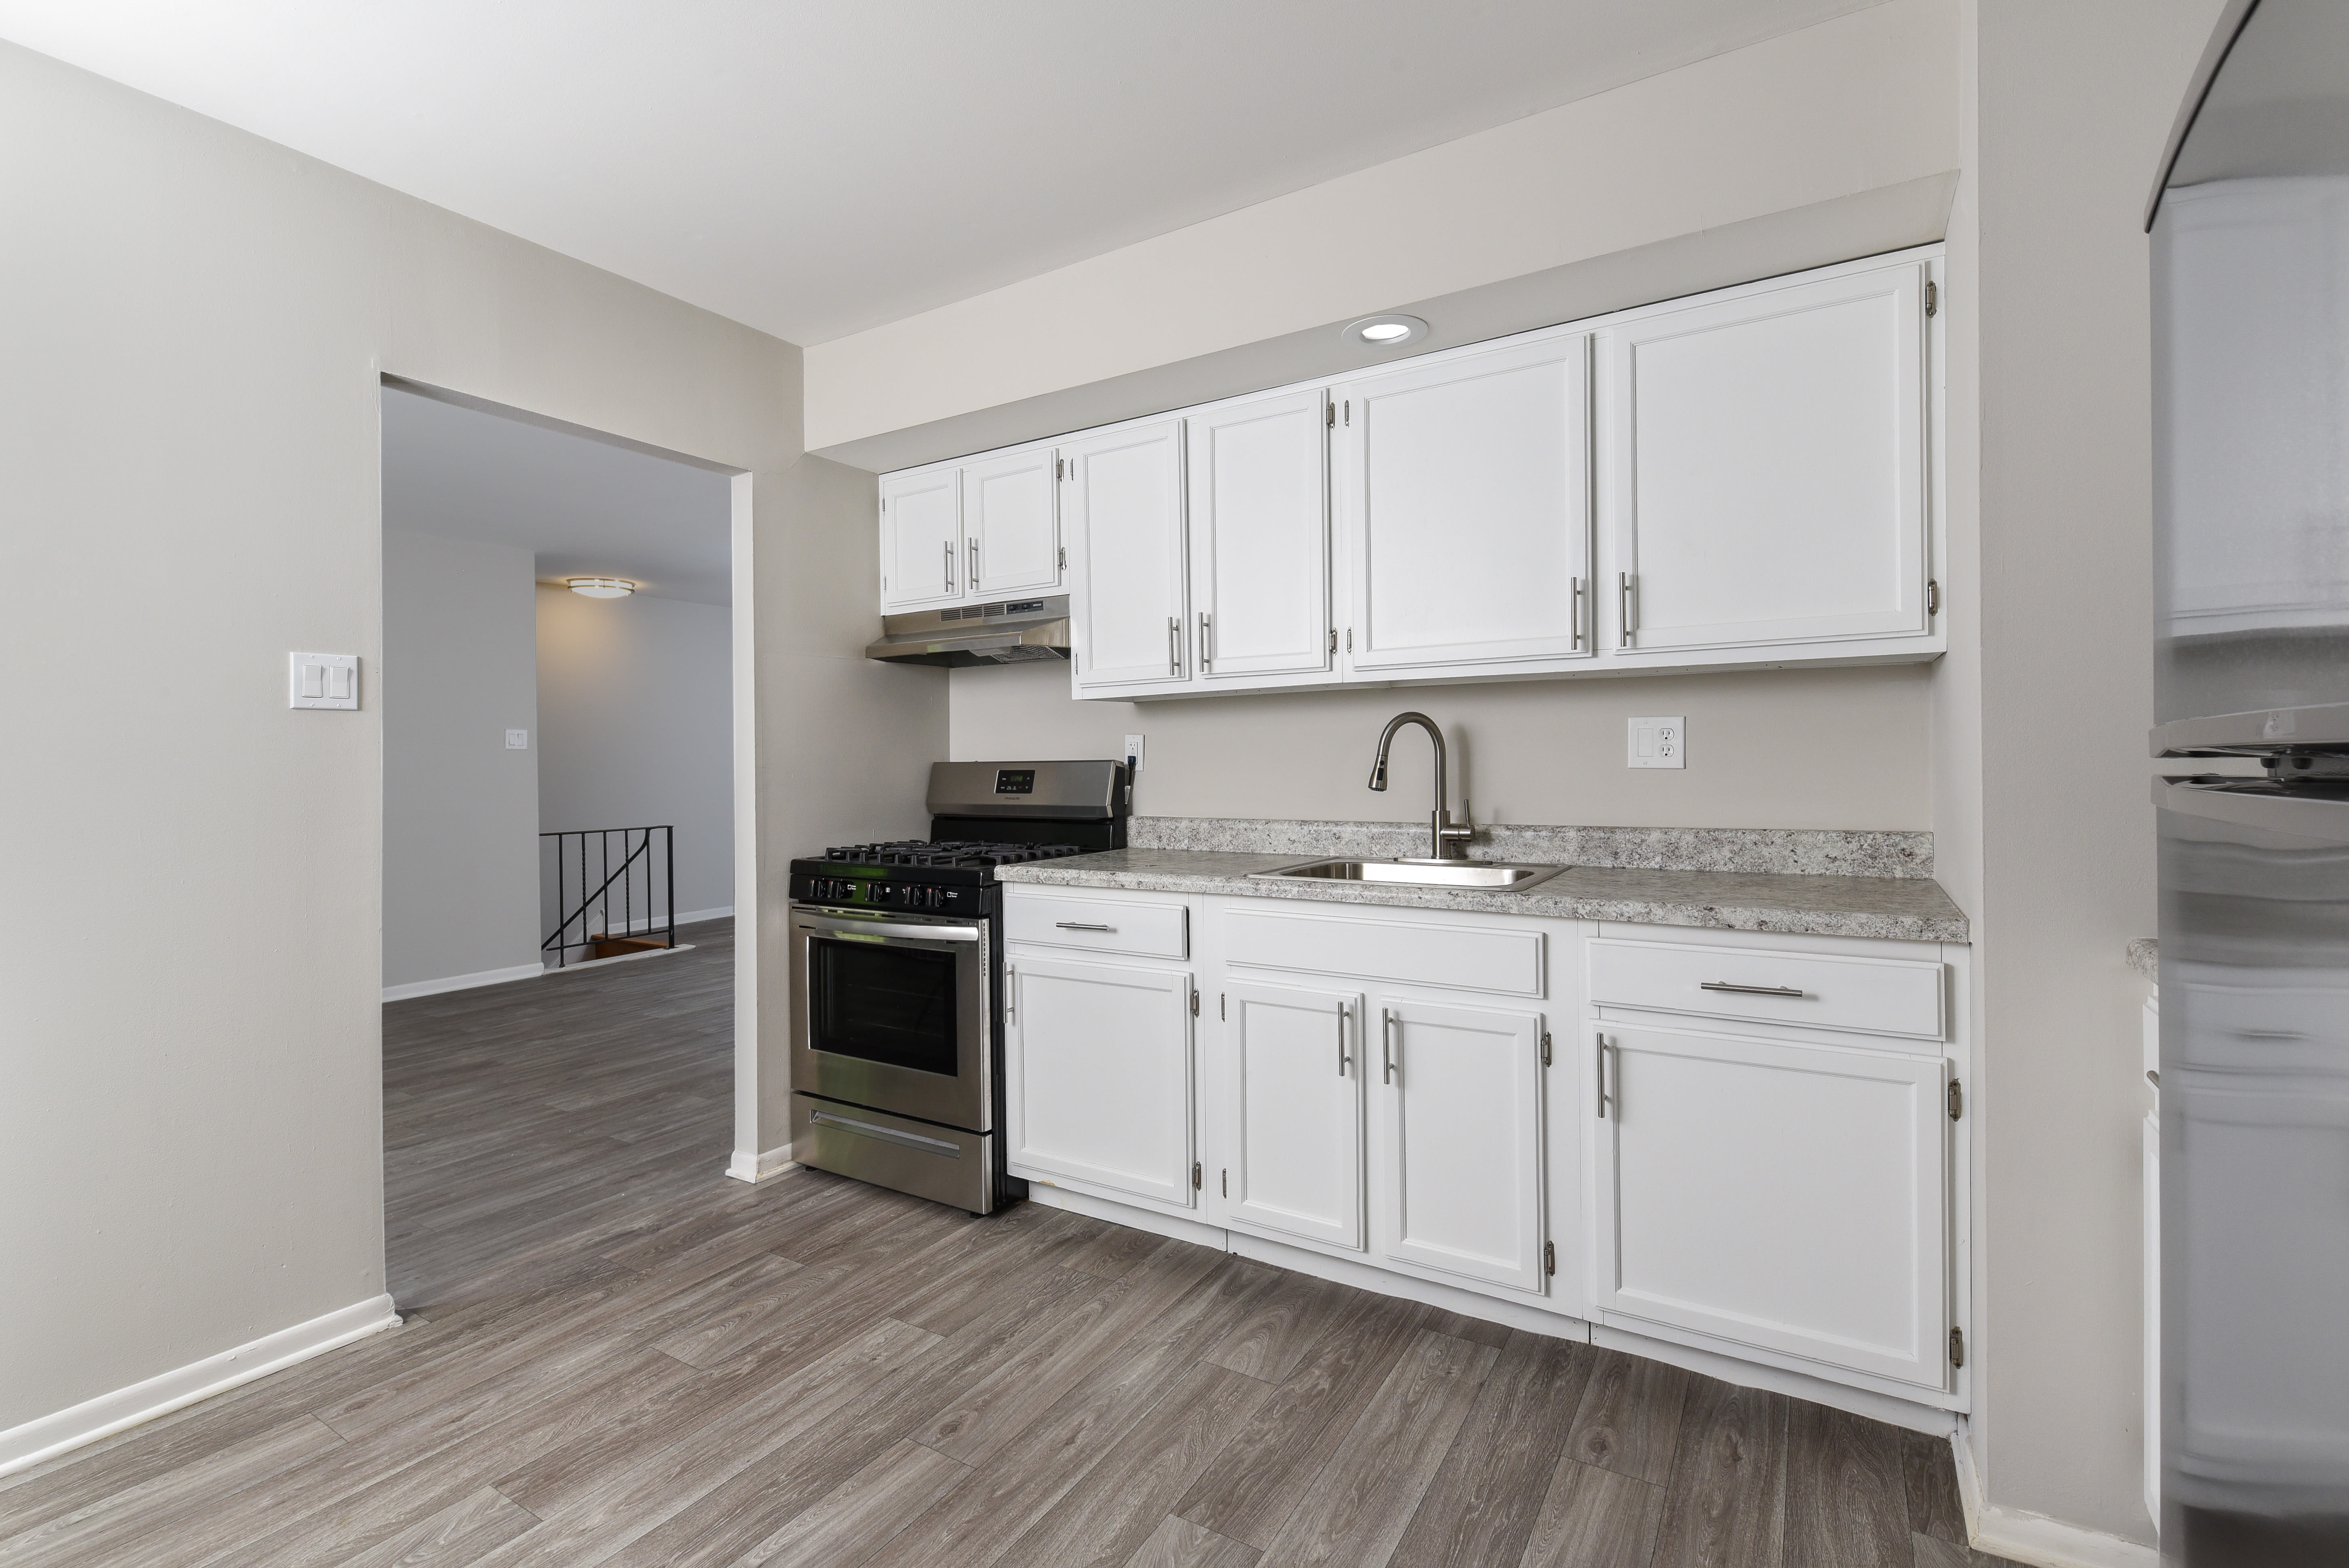 Updated model kitchen at The Nolan in Morrisville, Pennsylvania